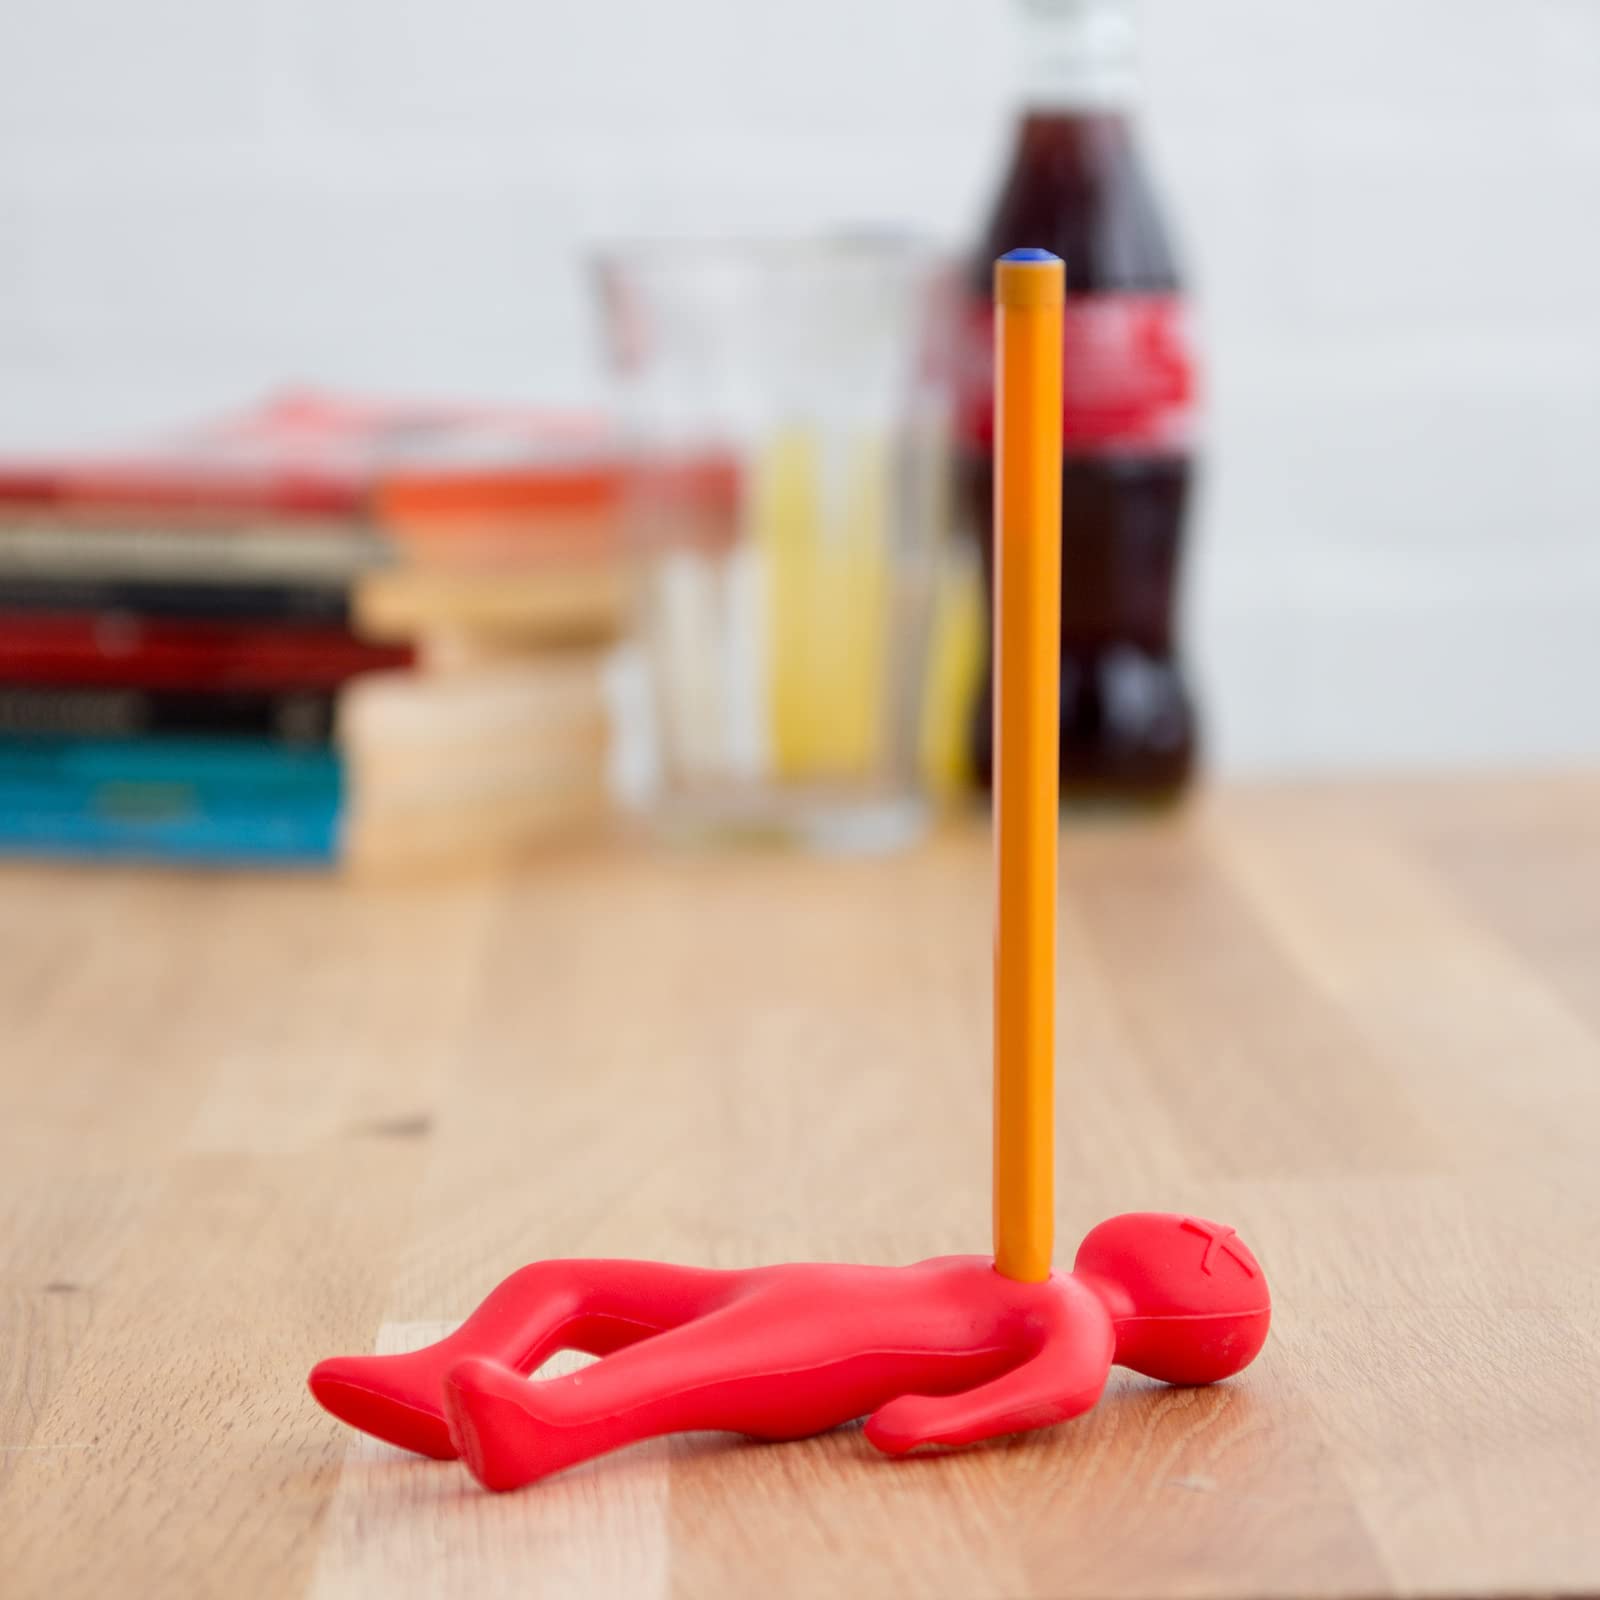 DEAD MAN NOVELTY SILICONE HOLDER FOR PENS & PENCILS